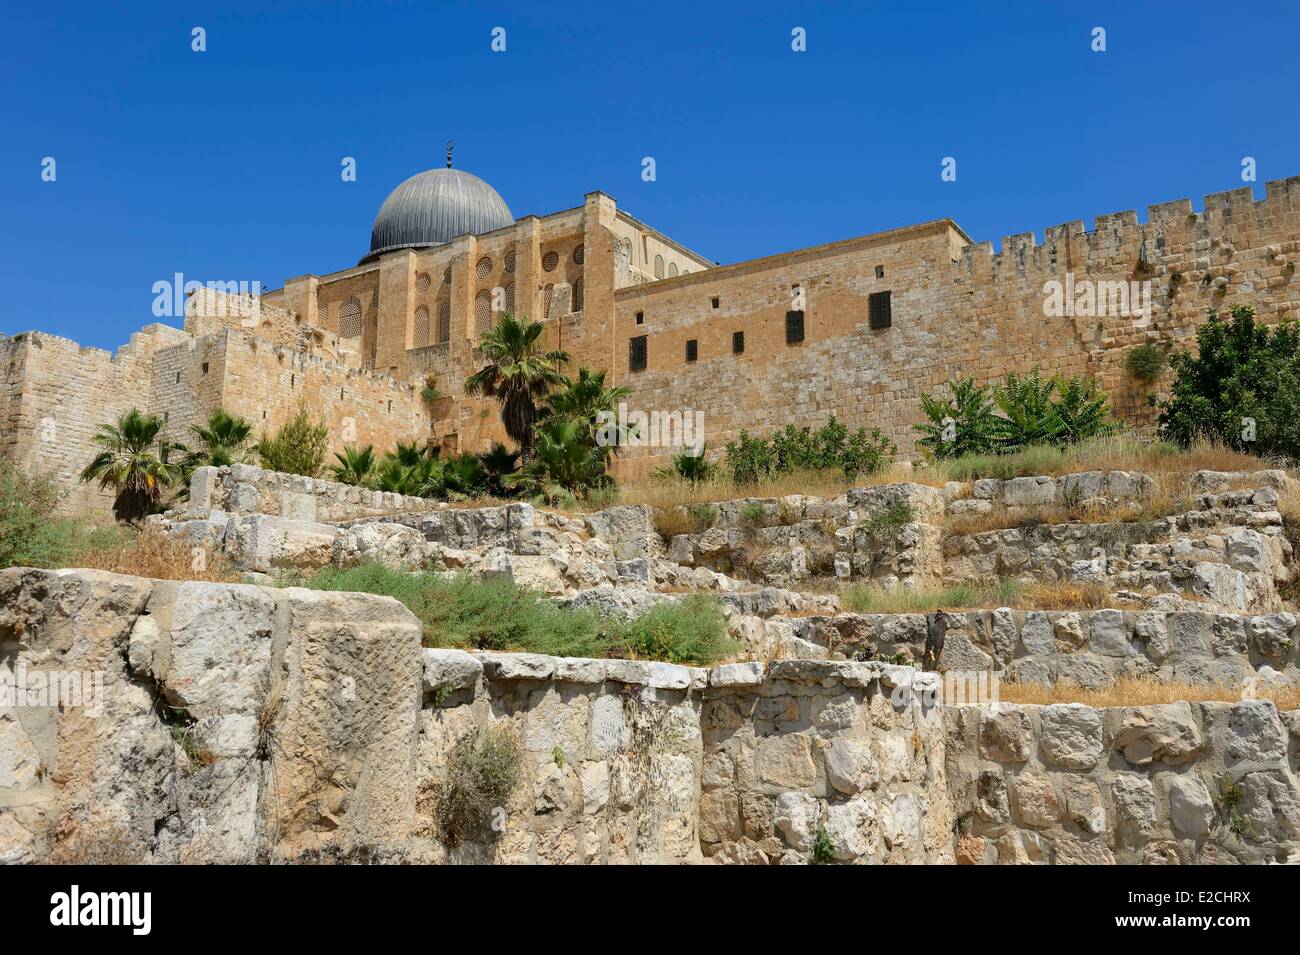 Israel, Jerusalem, holy city, the old town listed as World Heritage by UNESCO, the Temple Mount seen from the Davidson Center, south retaining wall of the Temple built by Herod the Great and the Al Aqsa mosque Stock Photo